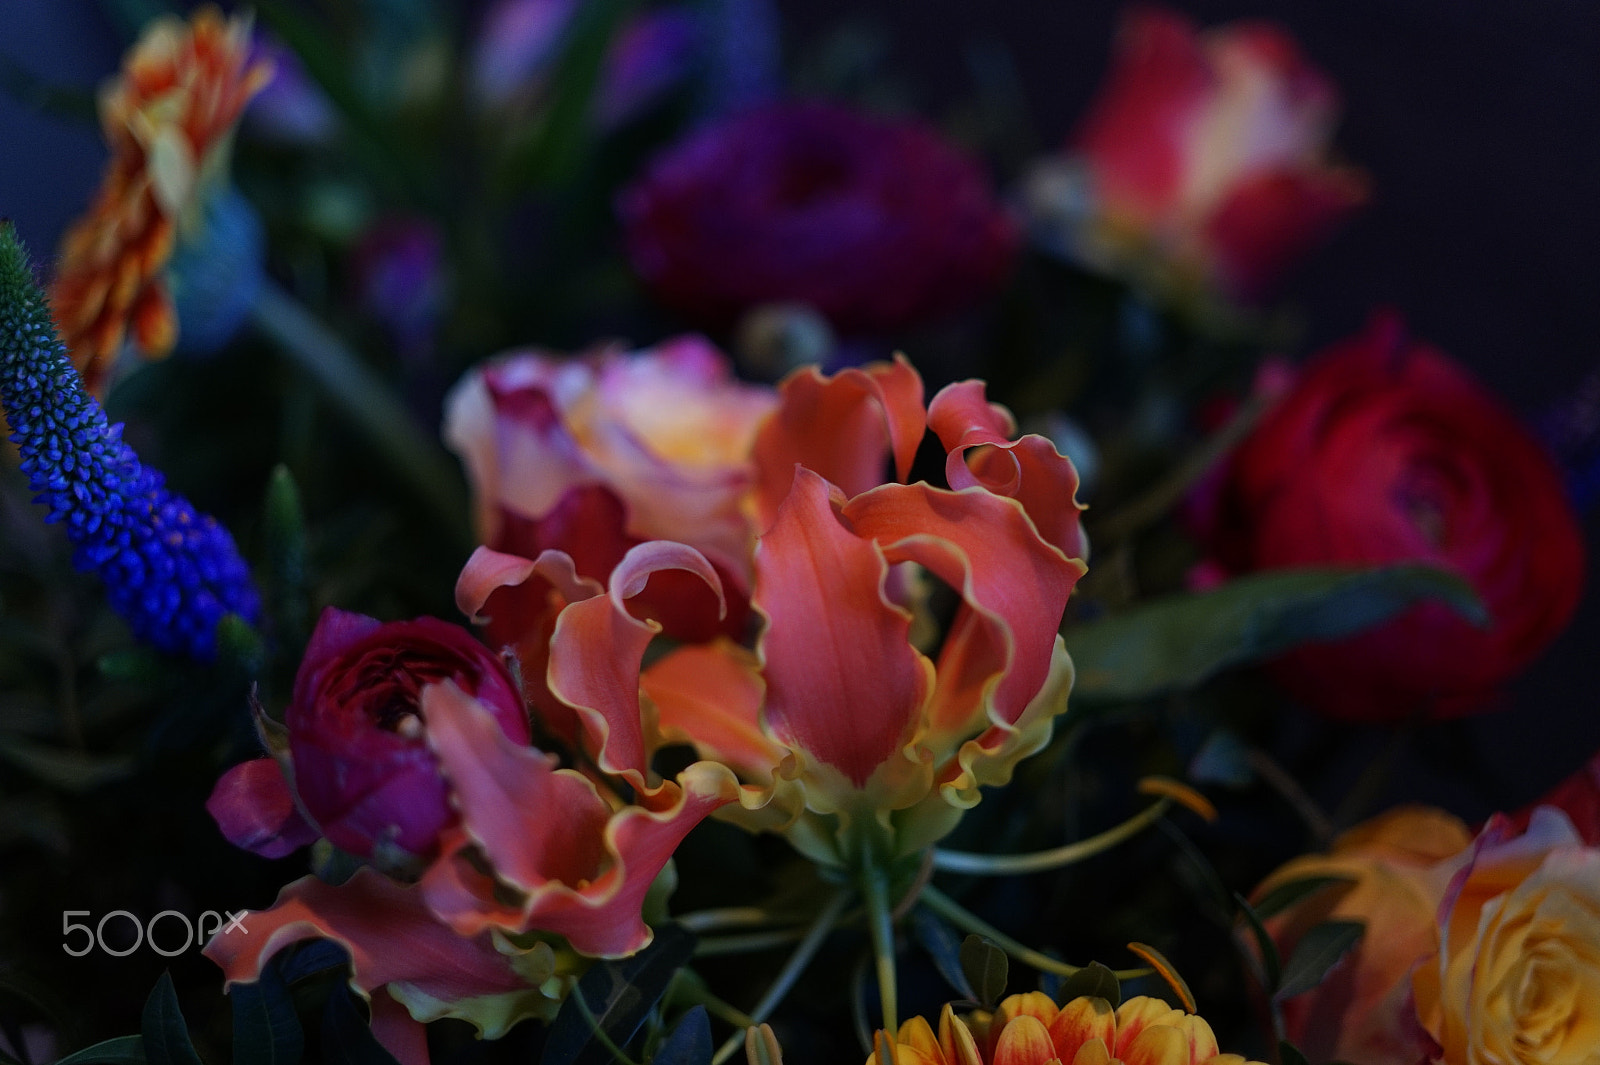 ZEISS Touit 32mm F1.8 sample photo. Color bomb photography